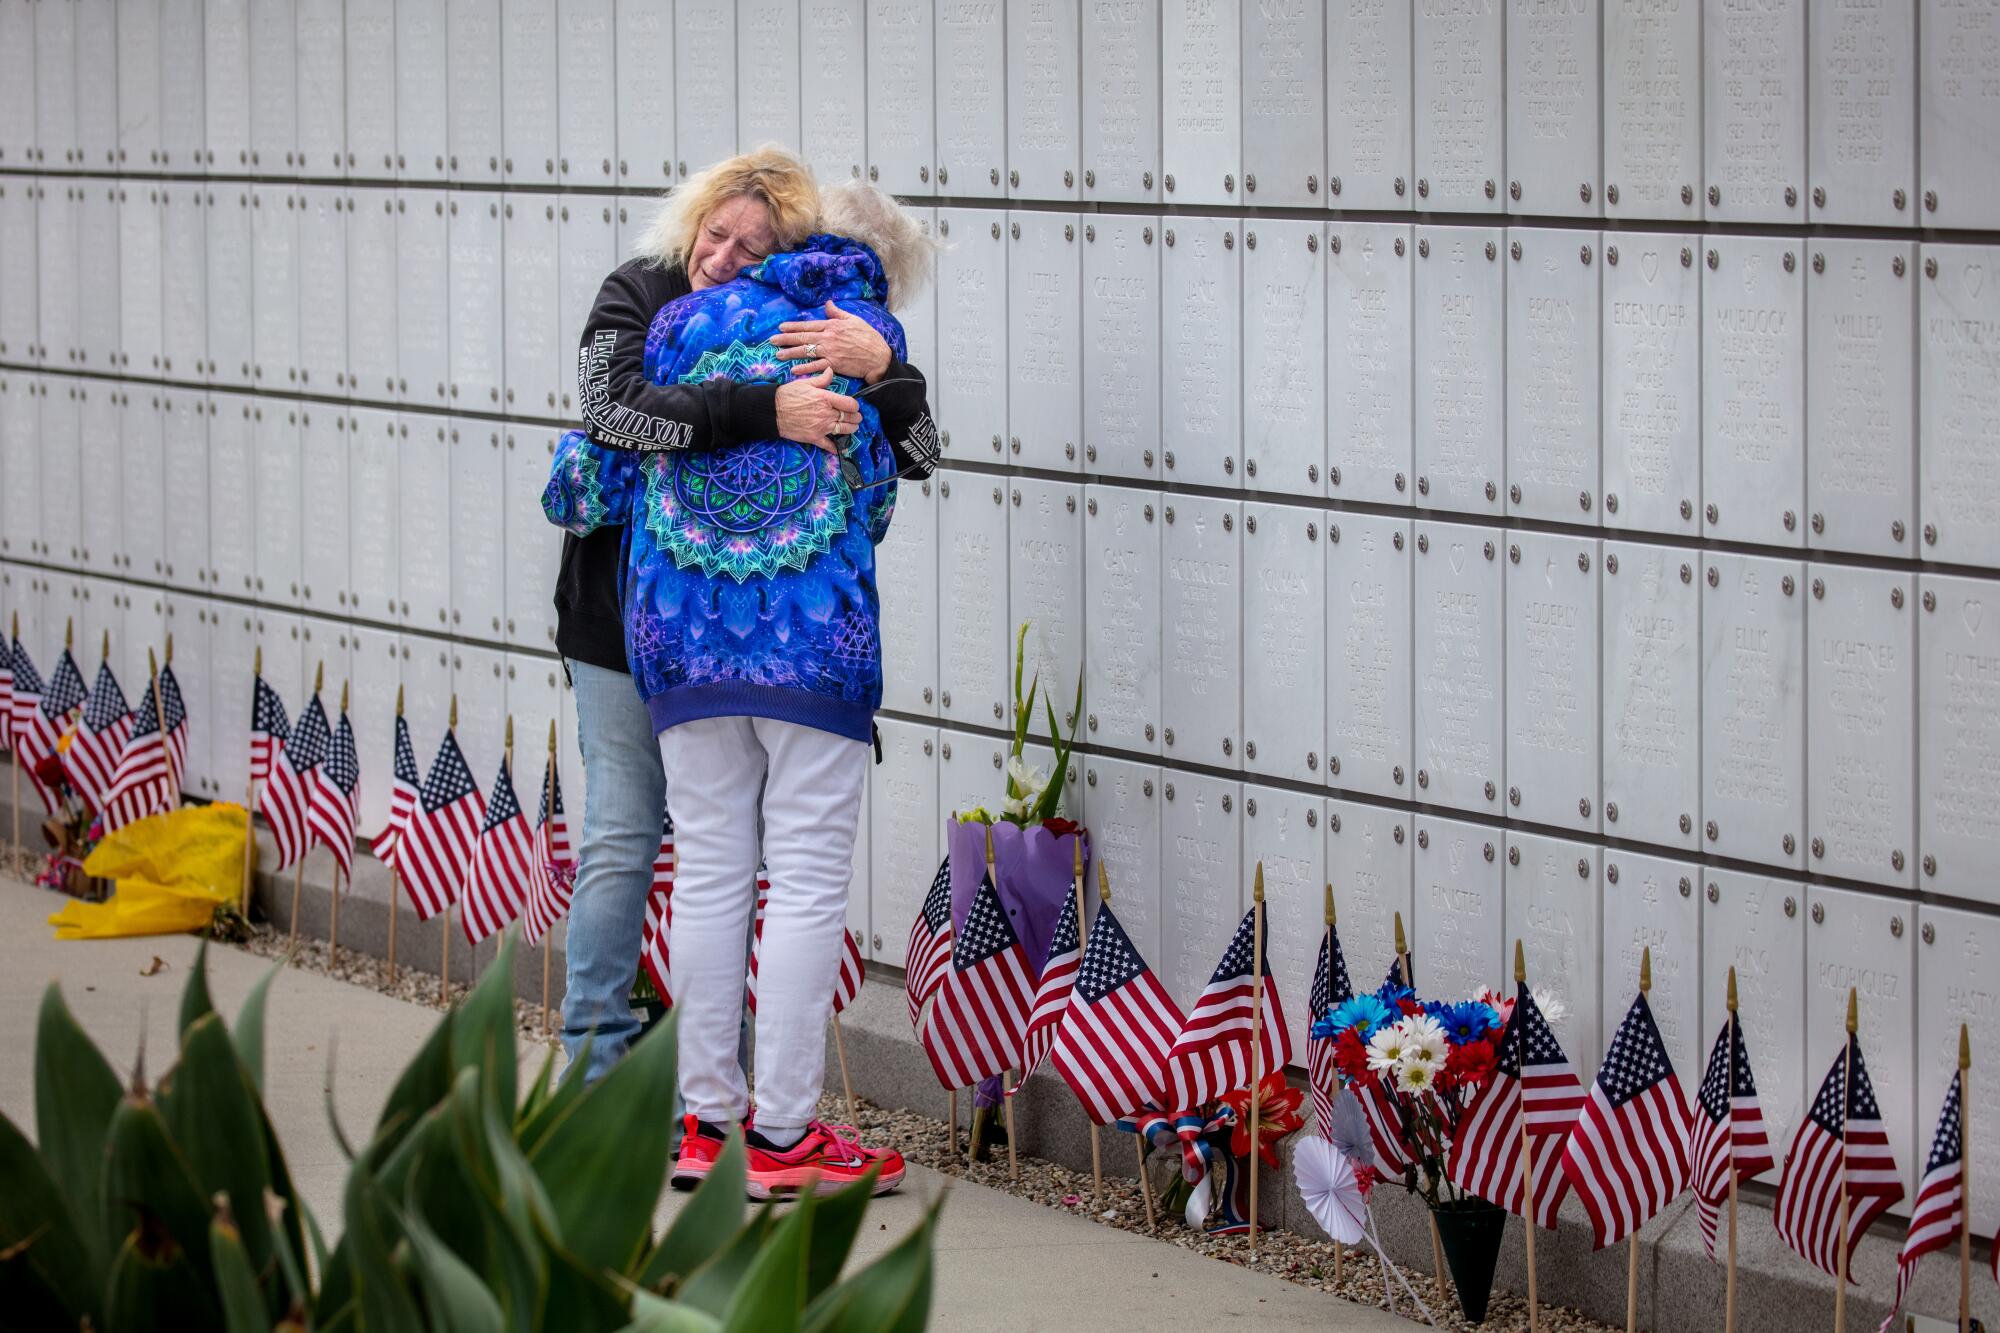 Meryle Moroney, left, hugs her mother Ruth, as they visit the remains of her father Carl, who died in November 2022